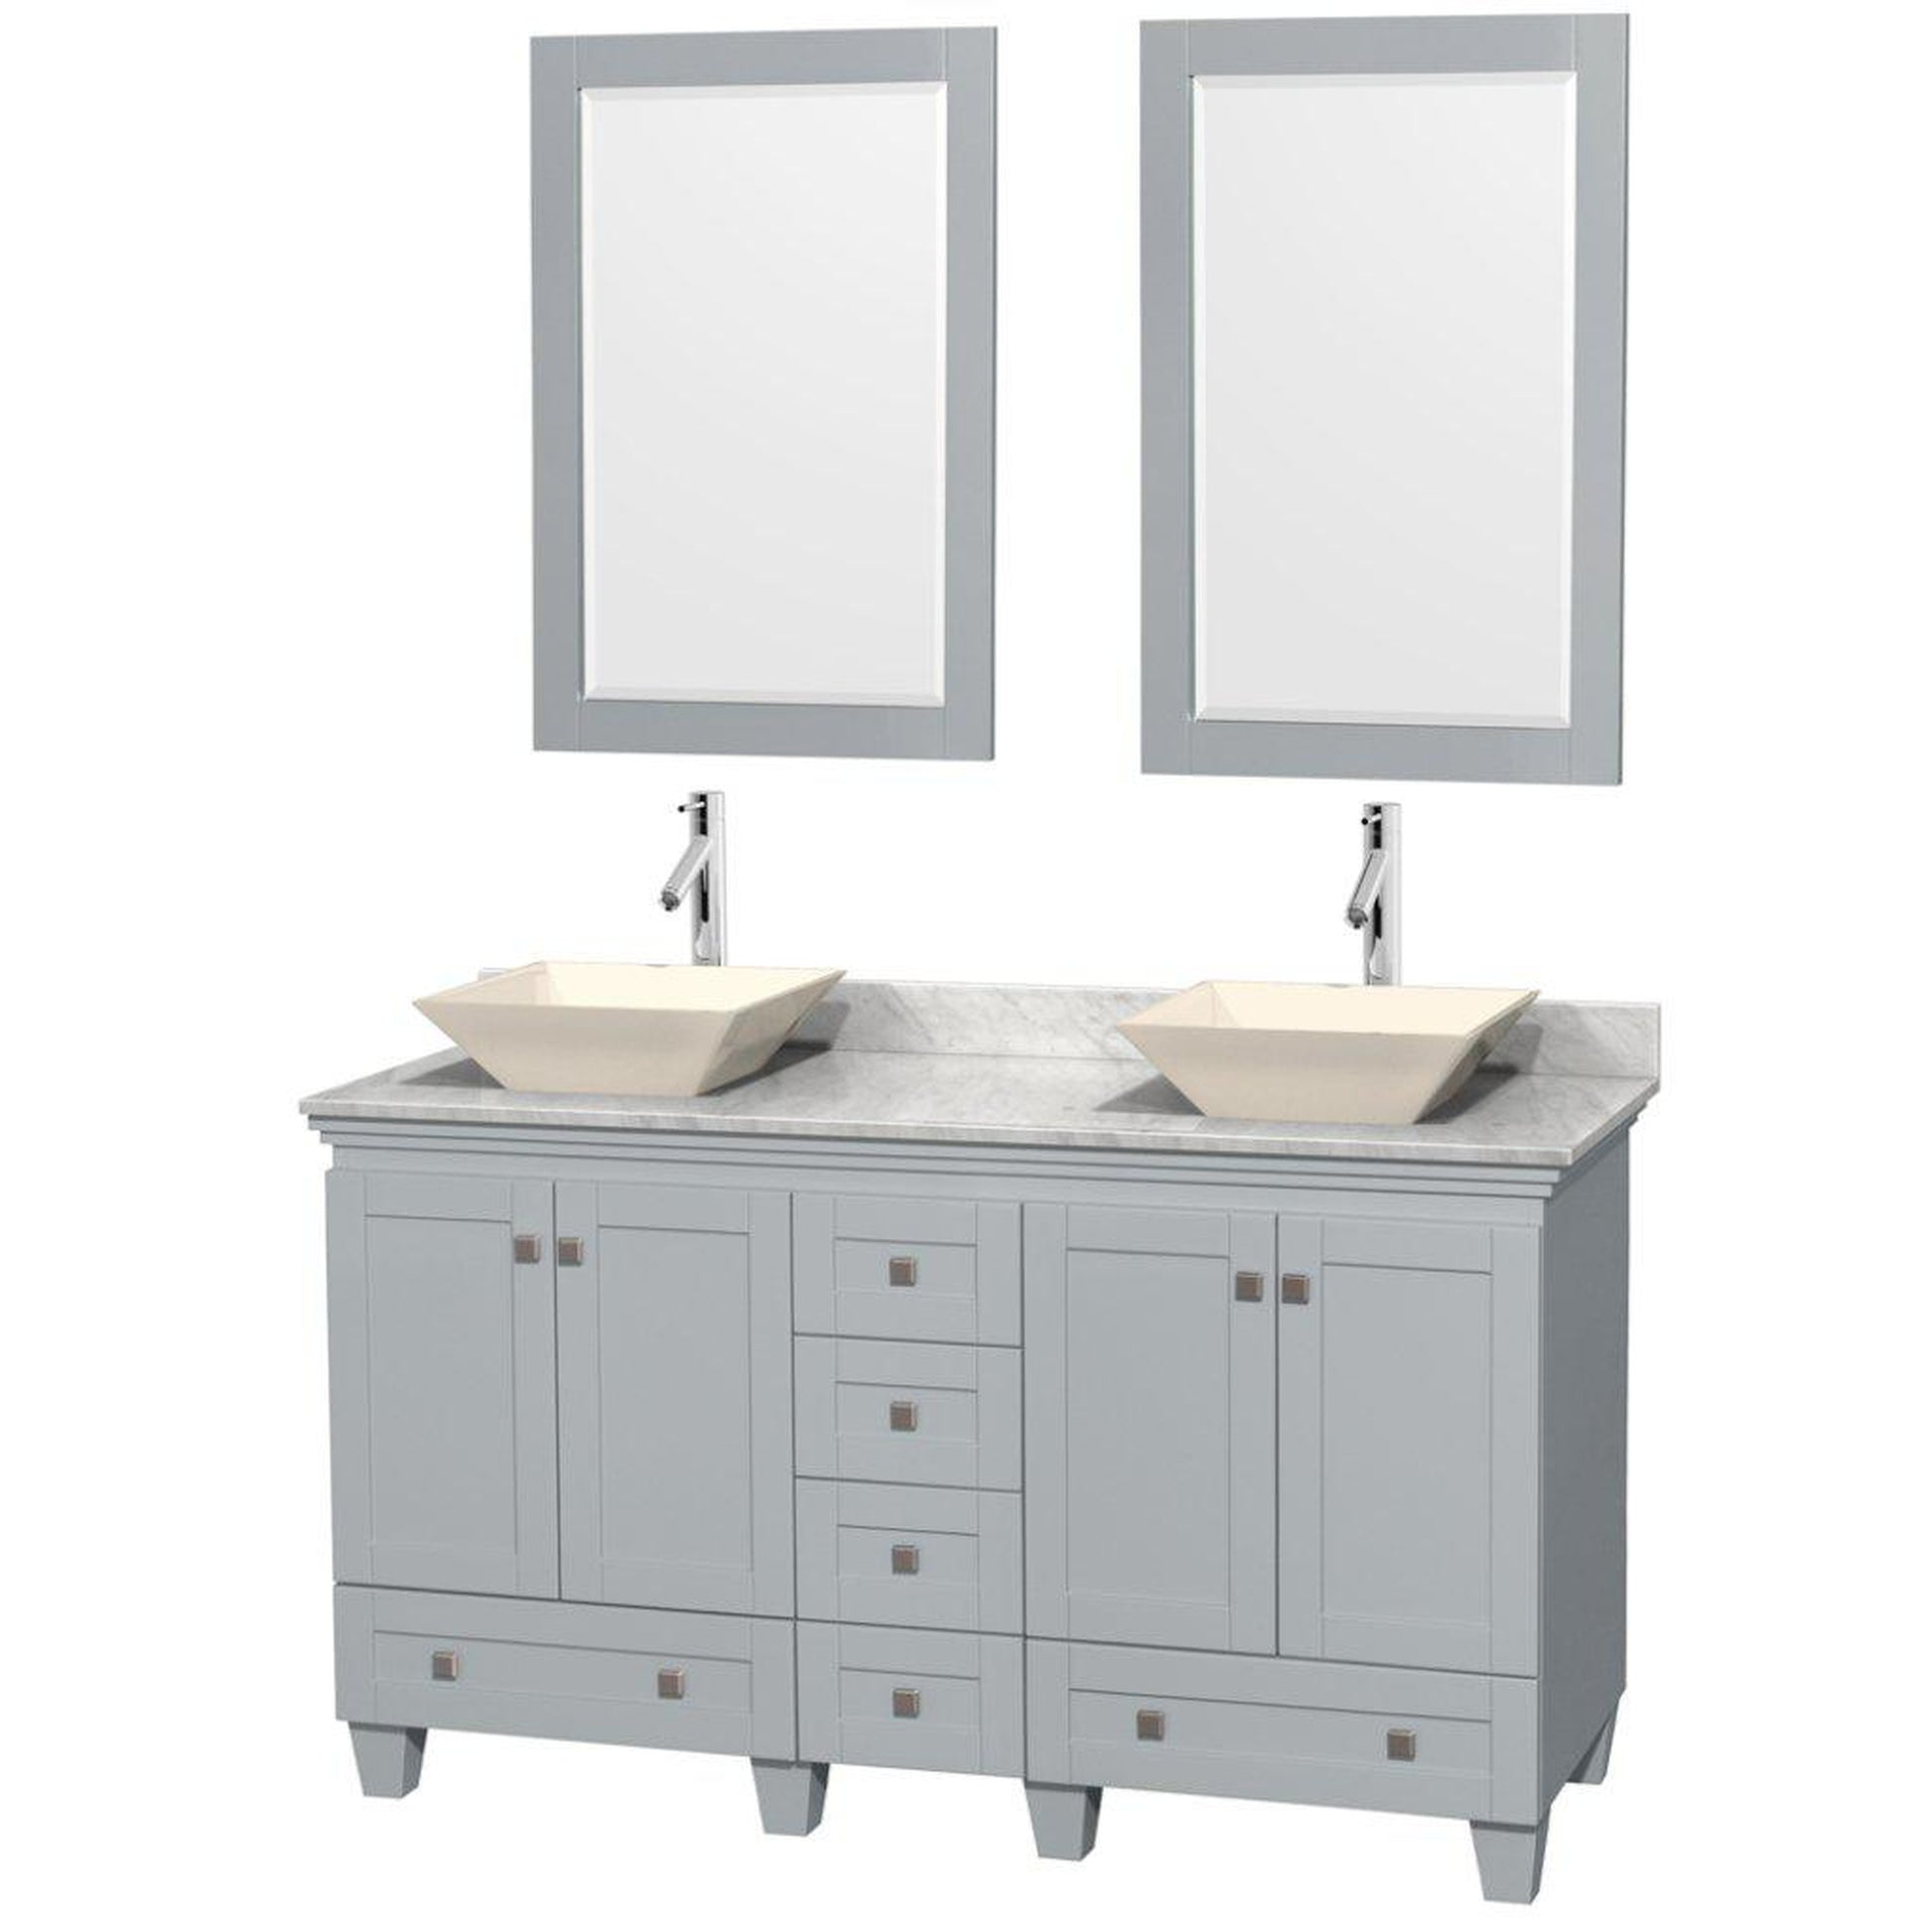 Wyndham Collection Acclaim 60" Double Bathroom Oyster Gray Vanity With White Carrara Marble Countertop And Pyra Bone Porcelain Sinks And 2 Set Of 24" Mirror